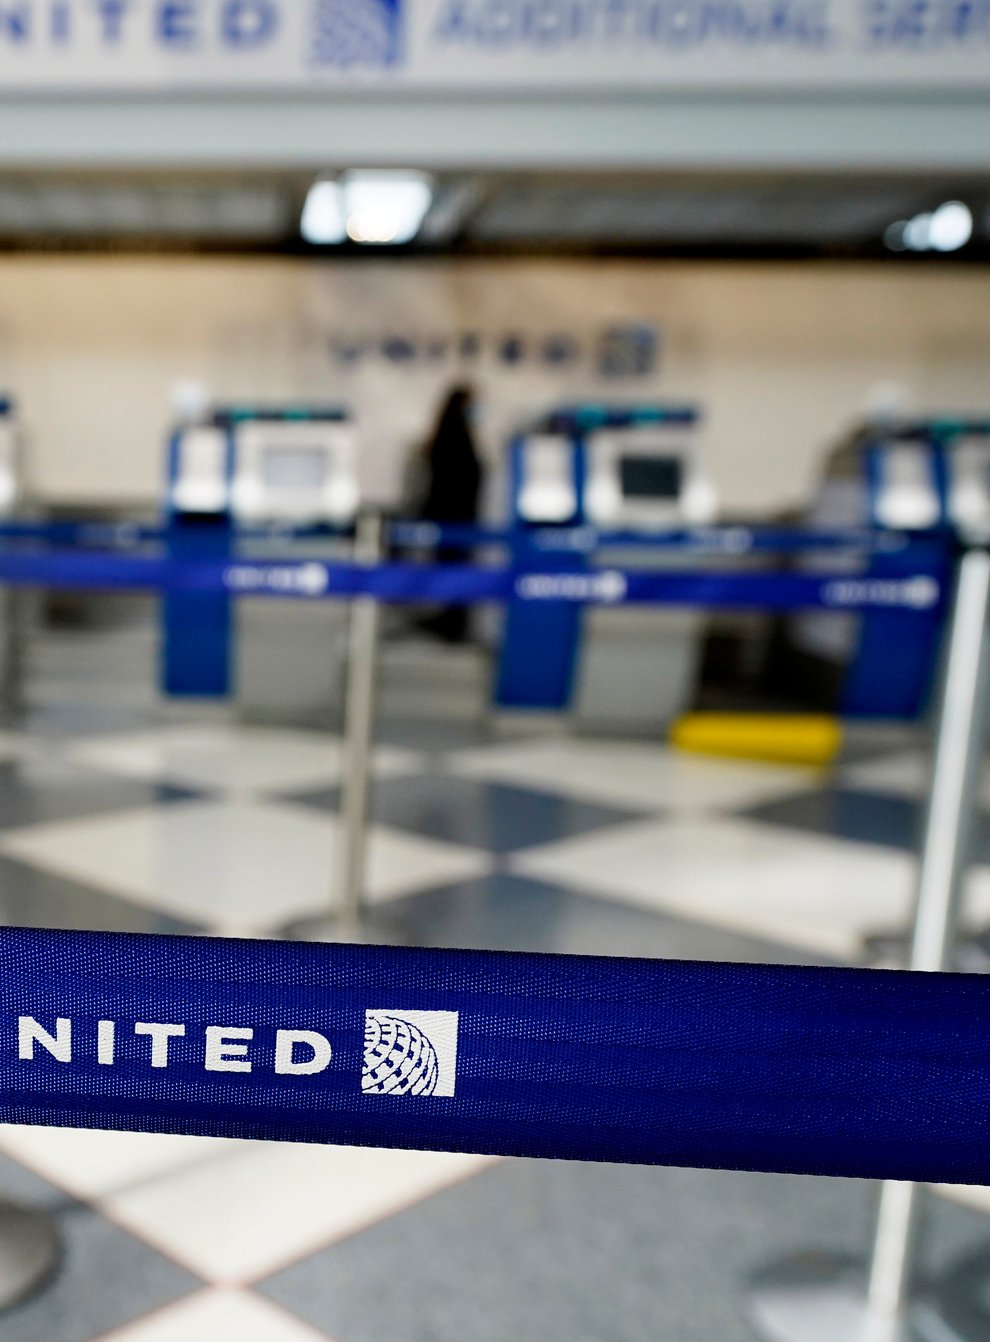 United Airlines counters in Terminal 1 at O’Hare International Airport in Chicago